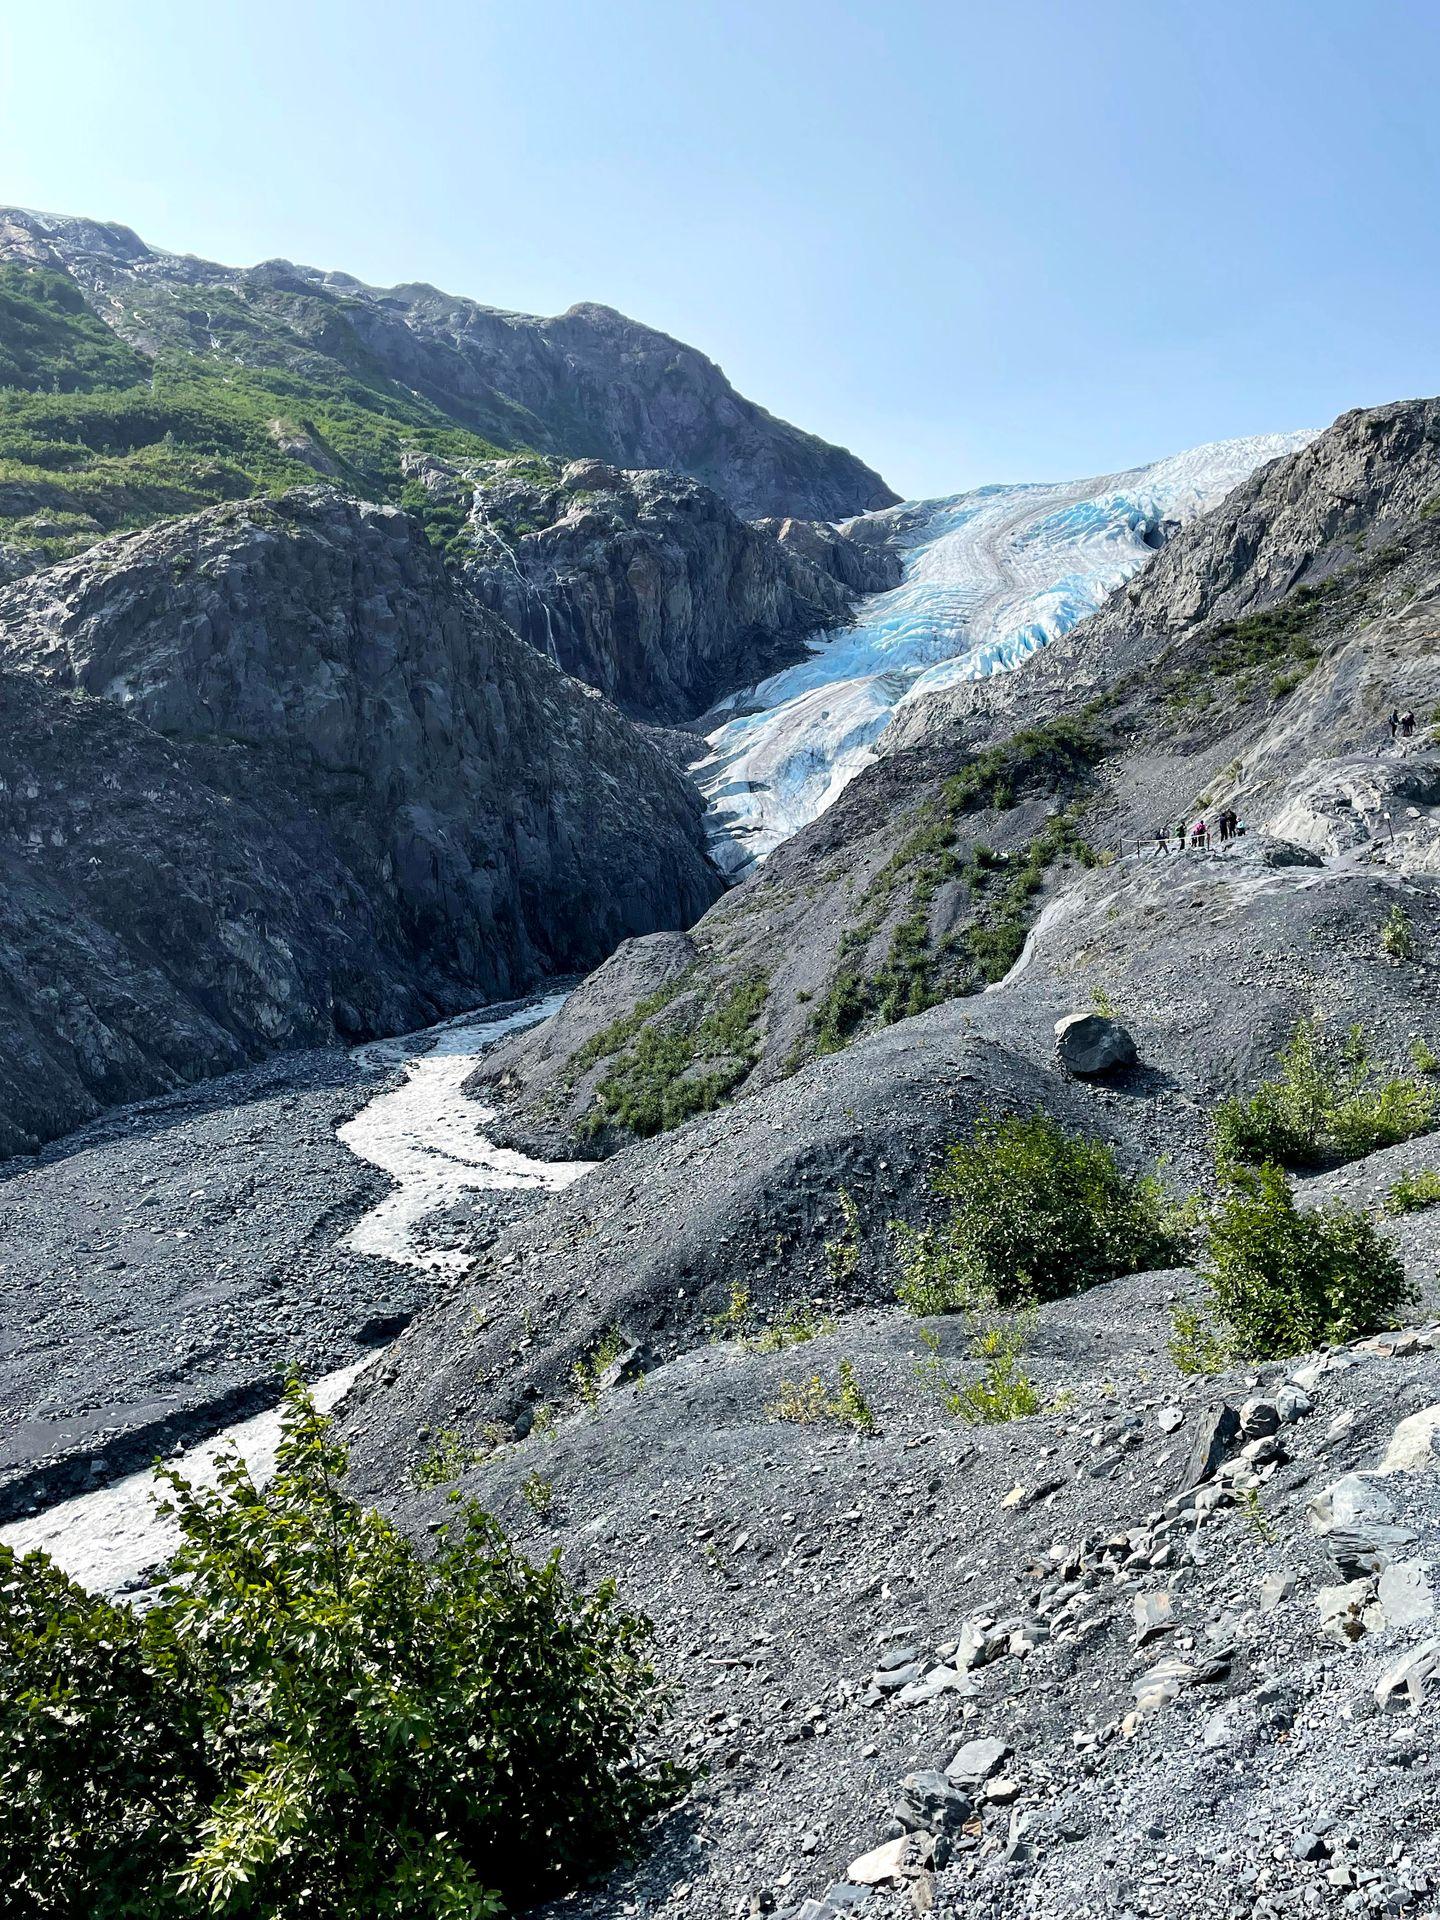 Exit Glacier with a sign for '2010' way out in front of the glacier.